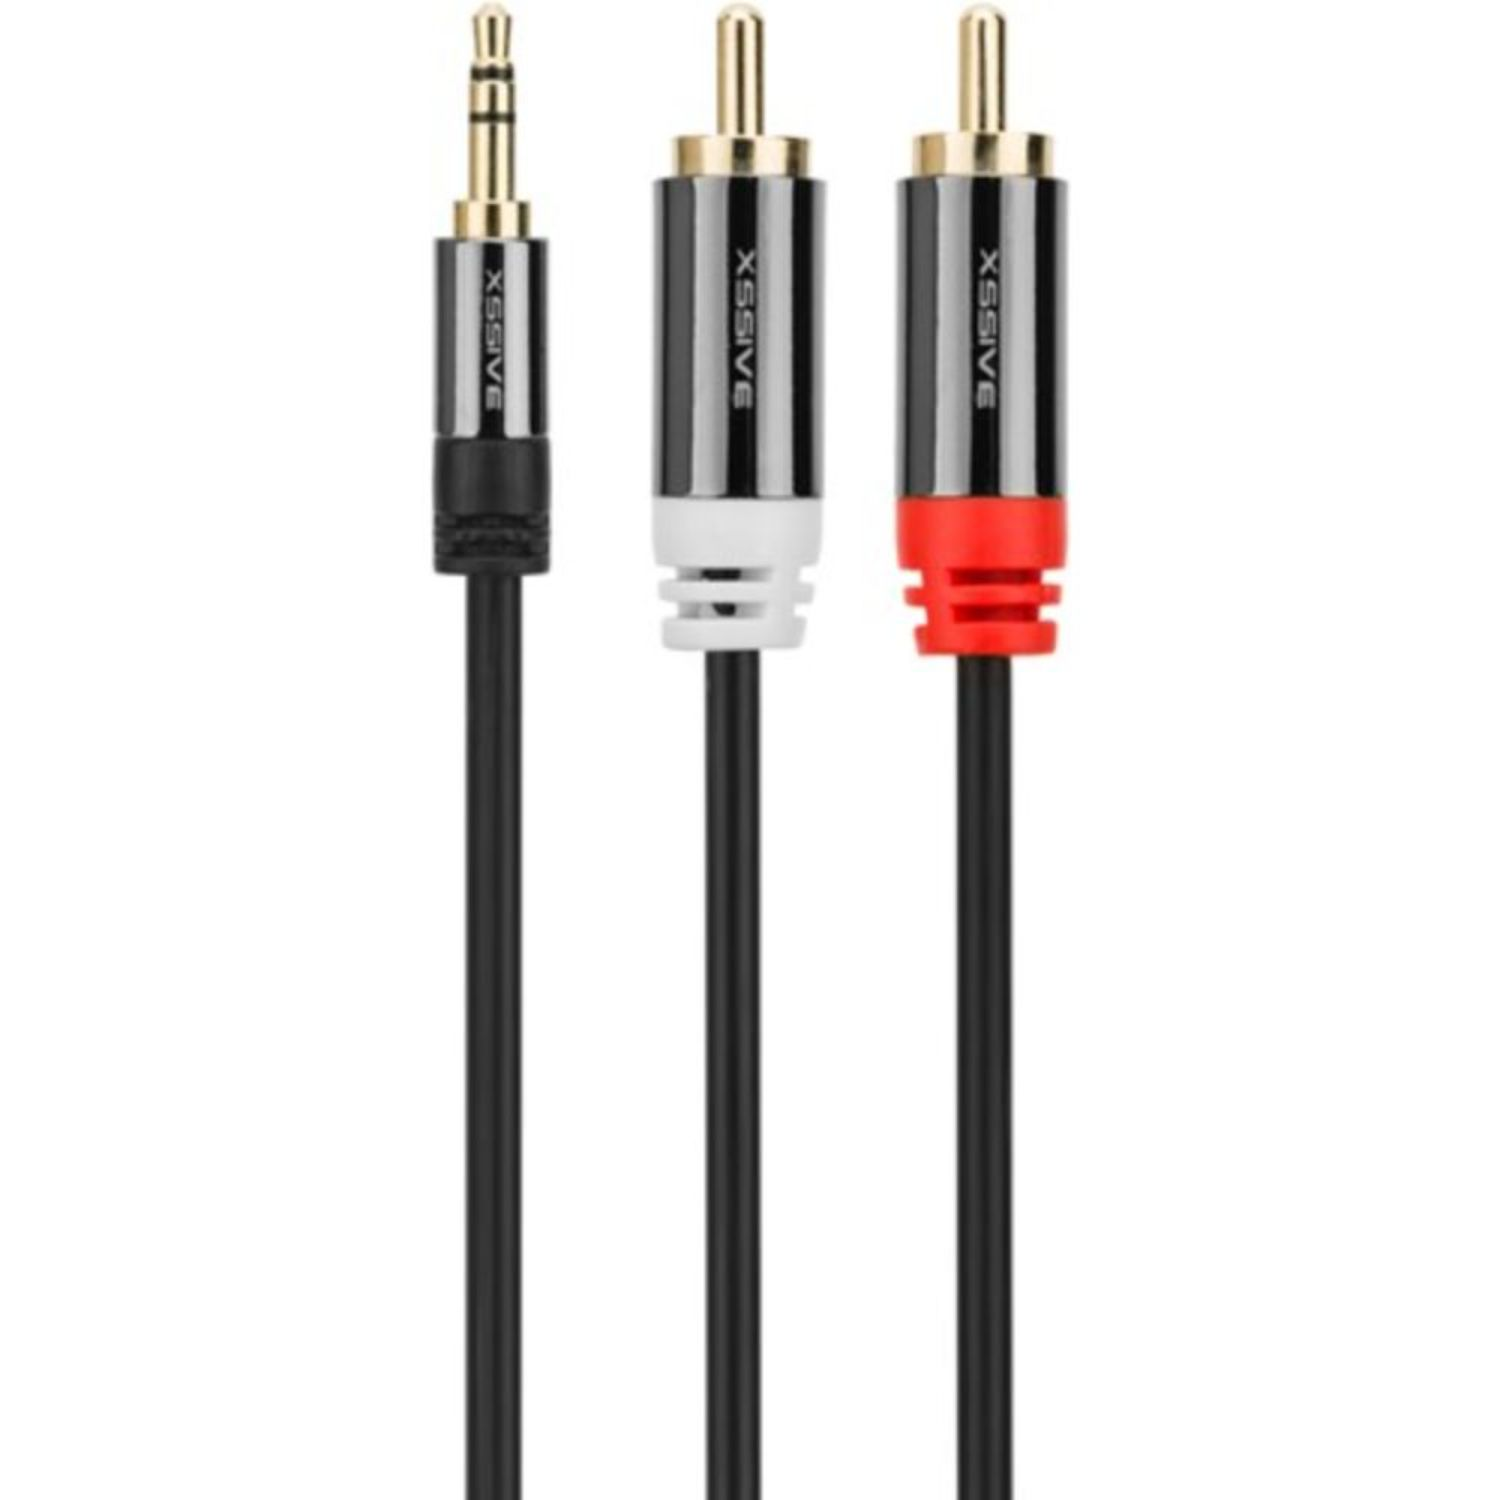 COFI 3.5MM to 2 RCA Cable1.8M Adapter, Schwarz